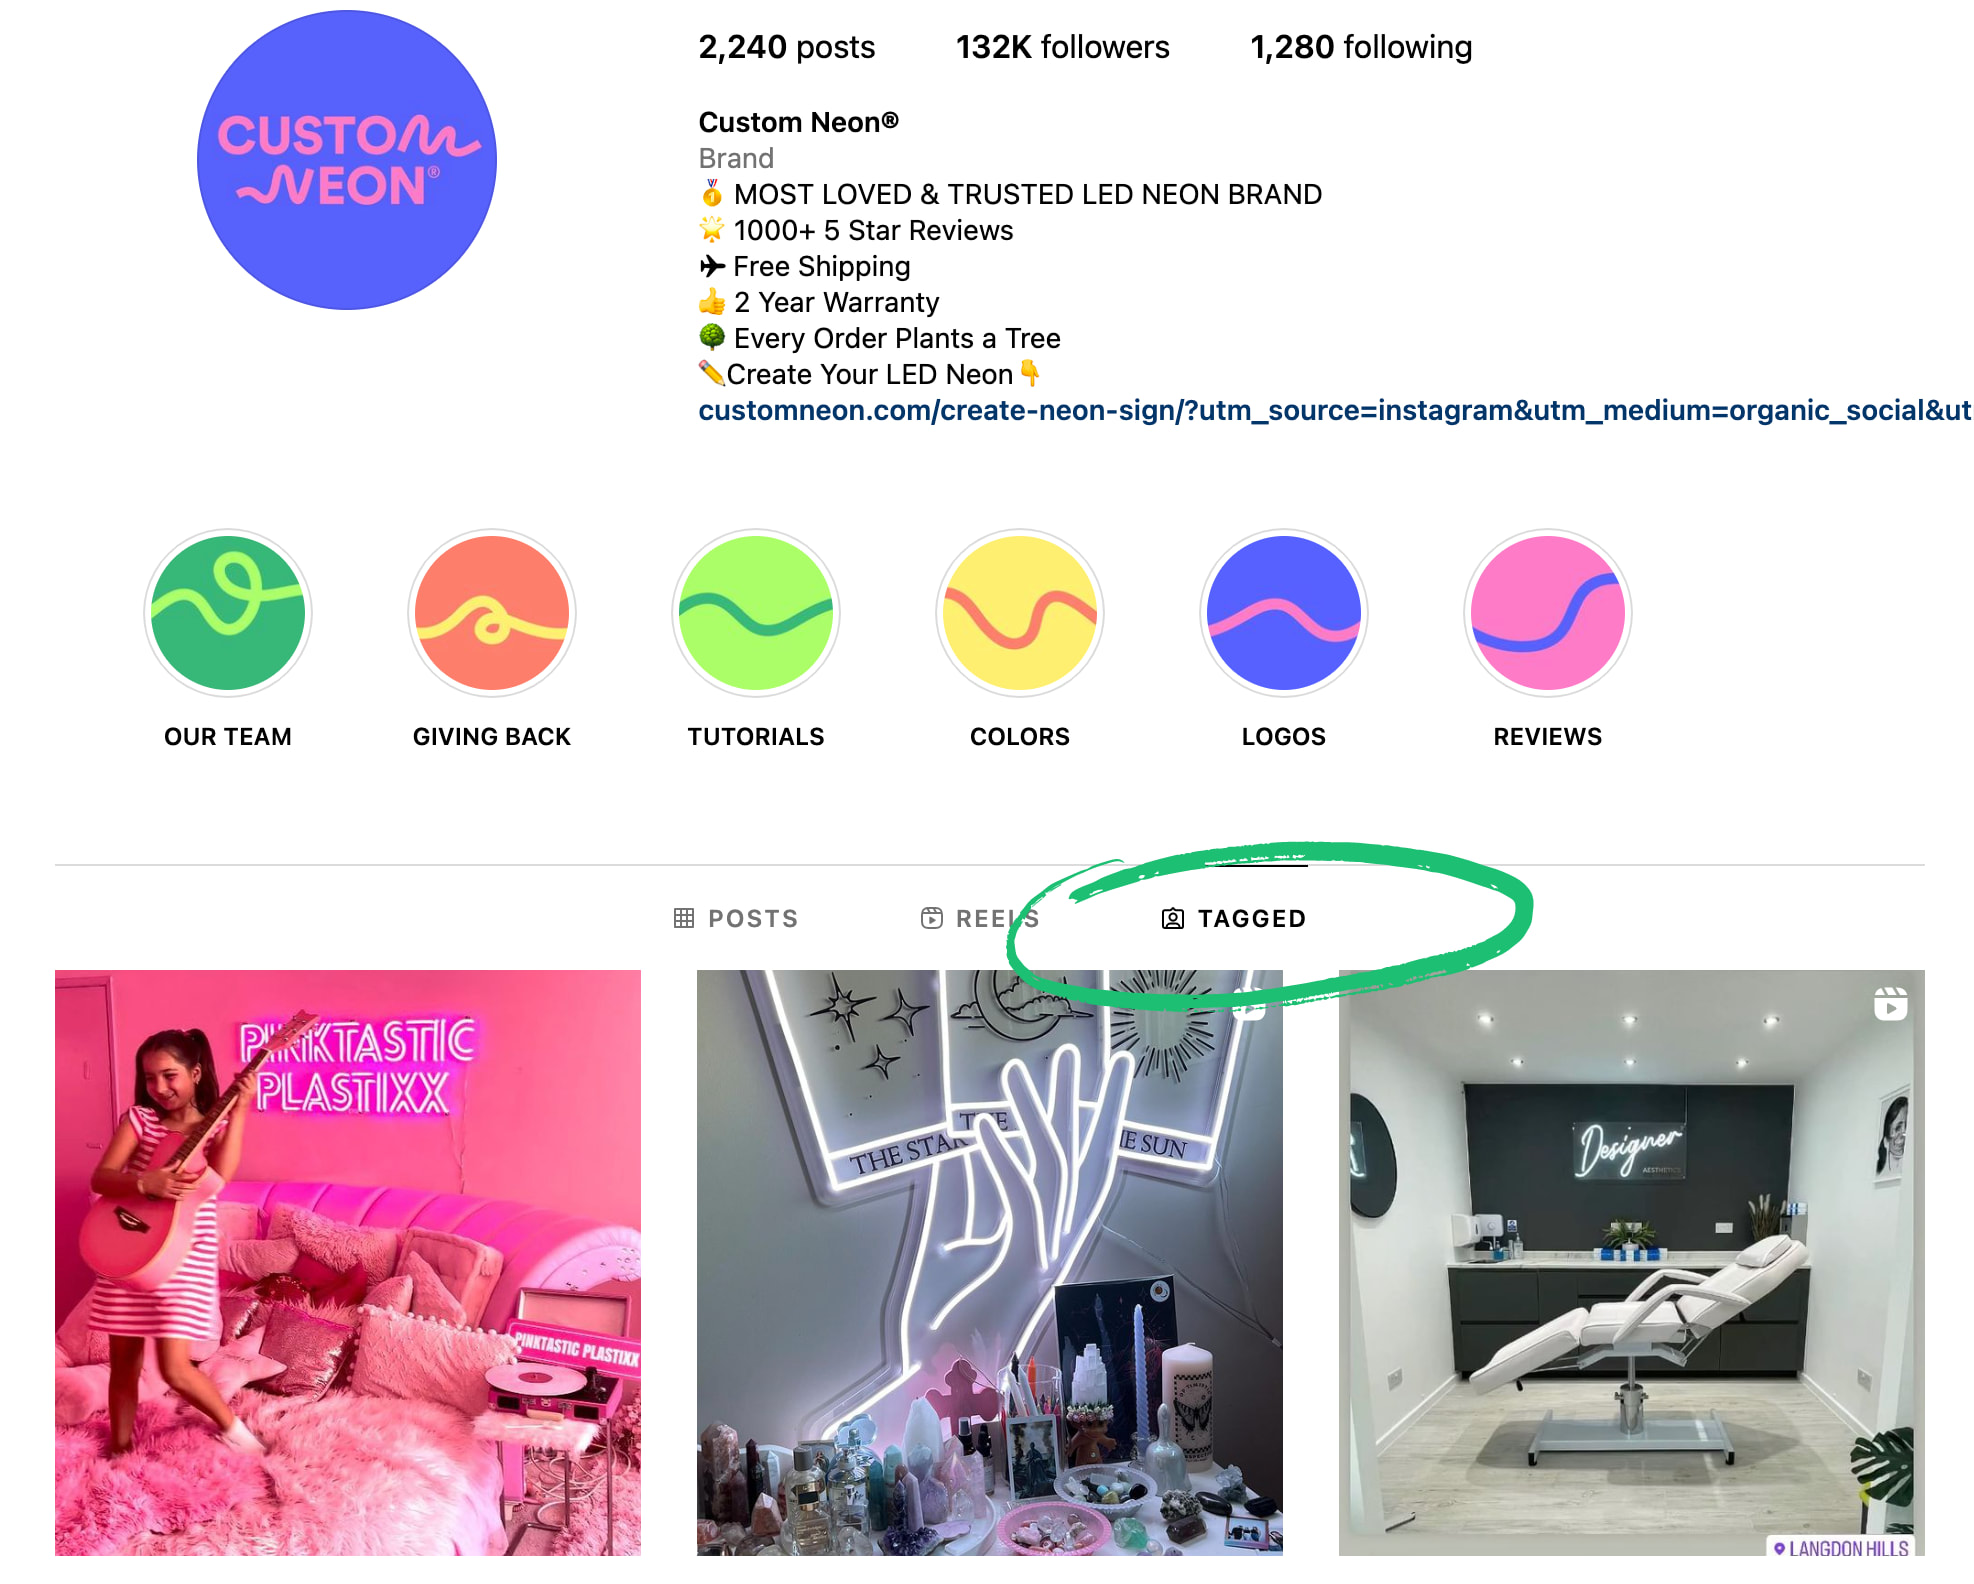 Screenshot of Custom Neon's Instagram, highlighting the tagged posts section